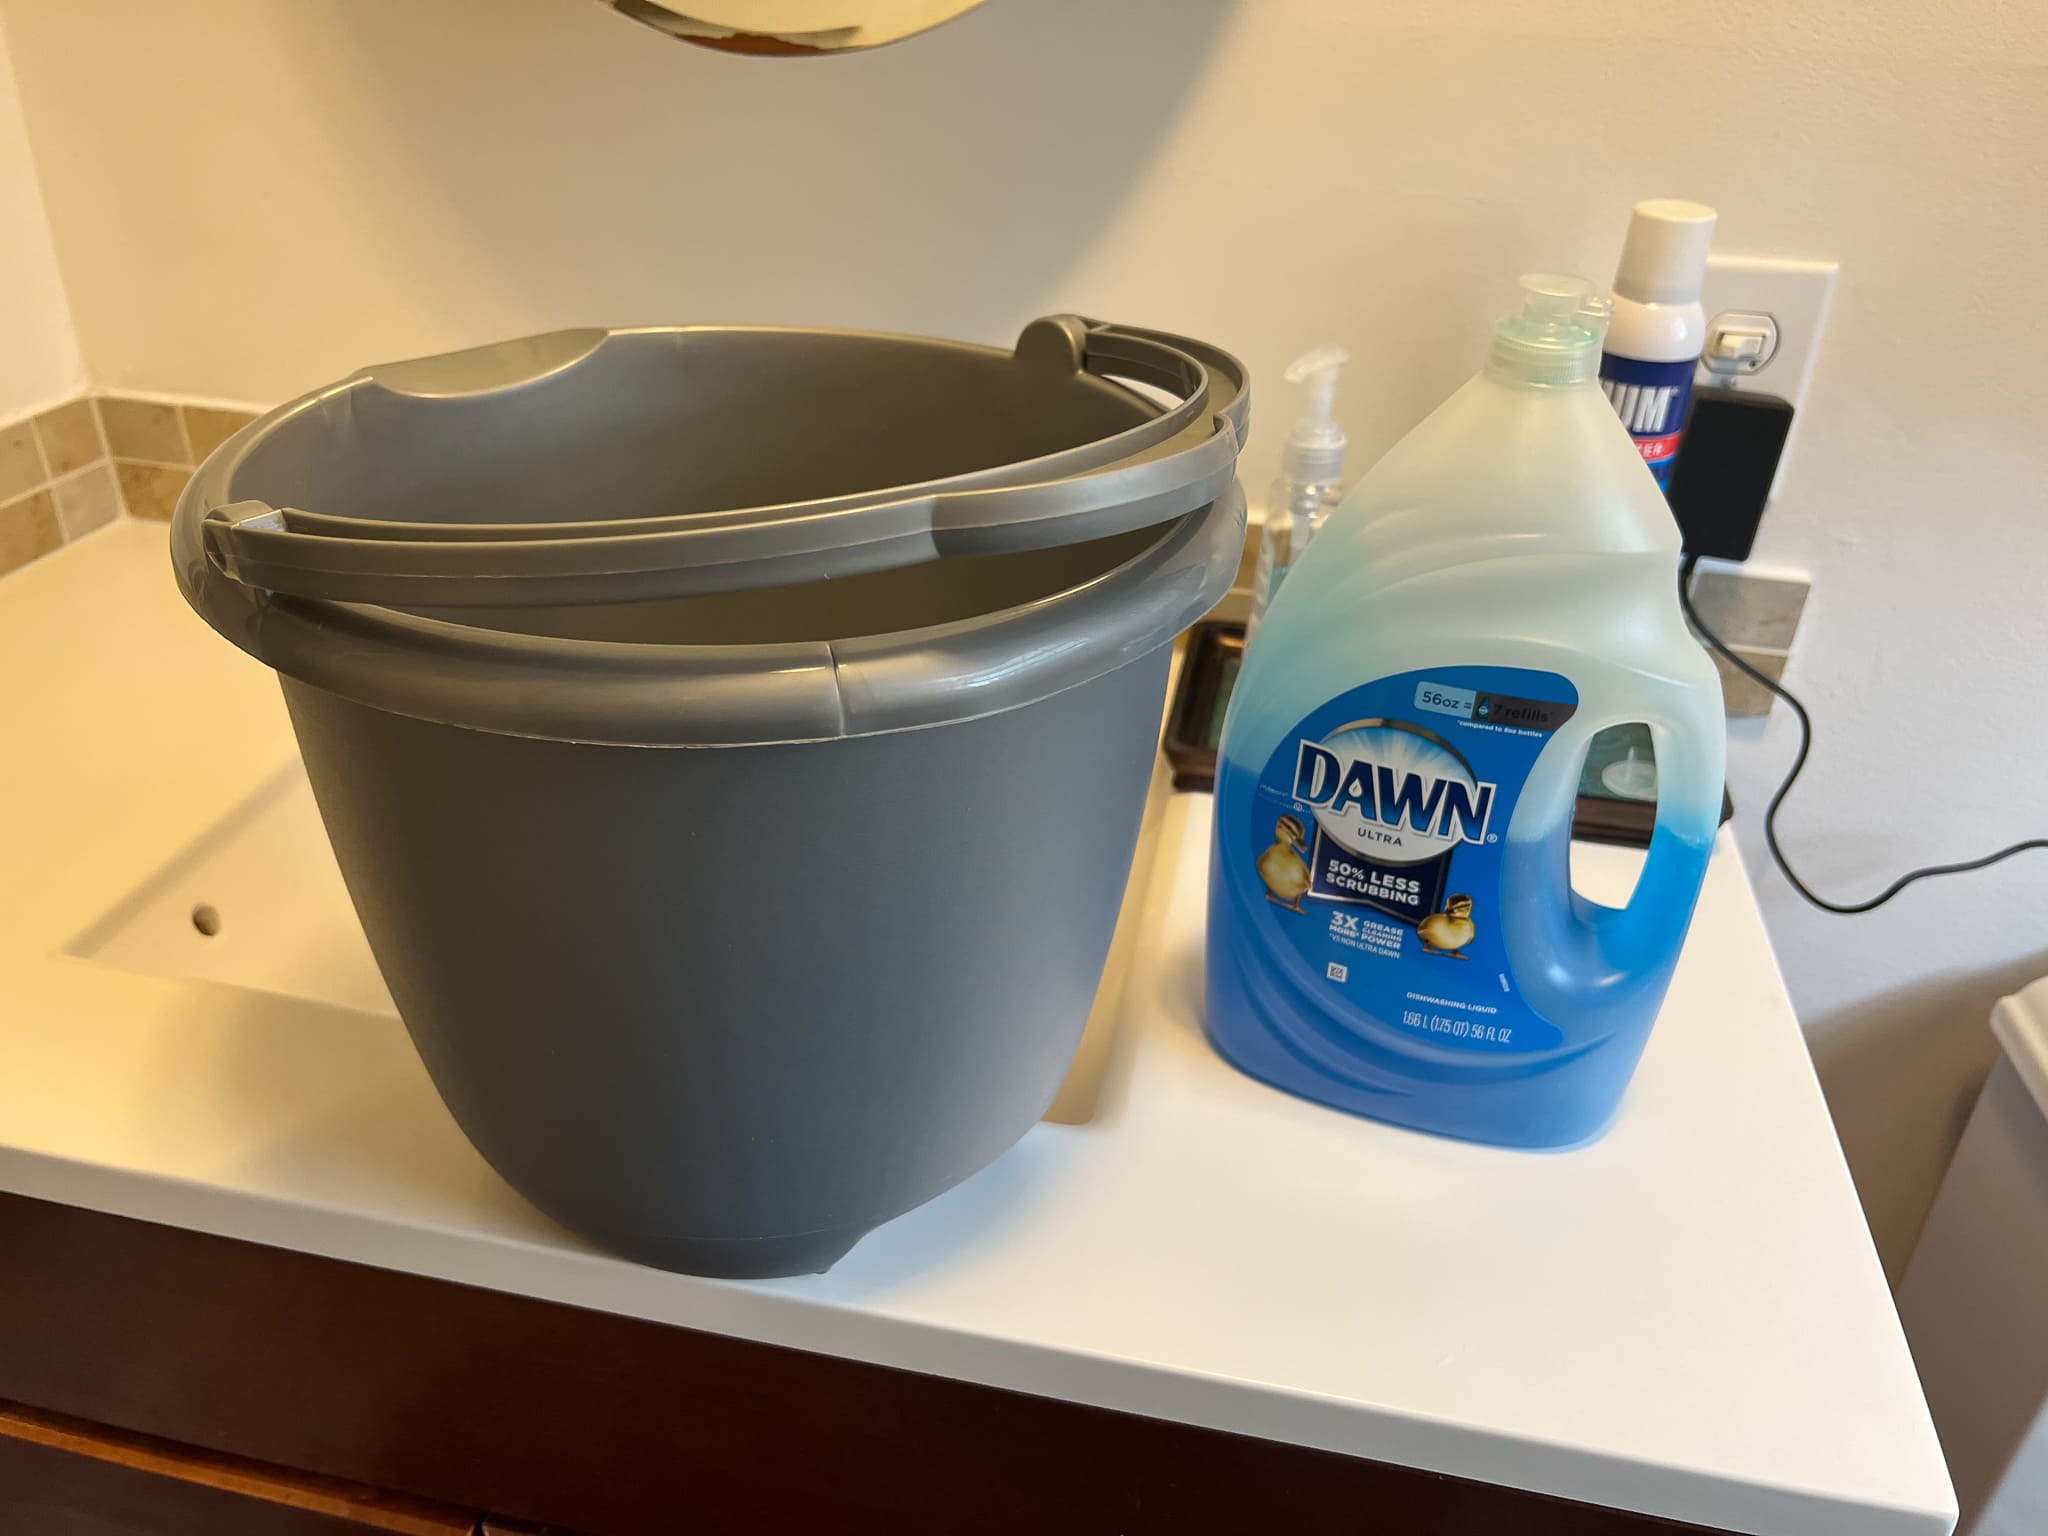 squeegee bucket and dawn dish soap